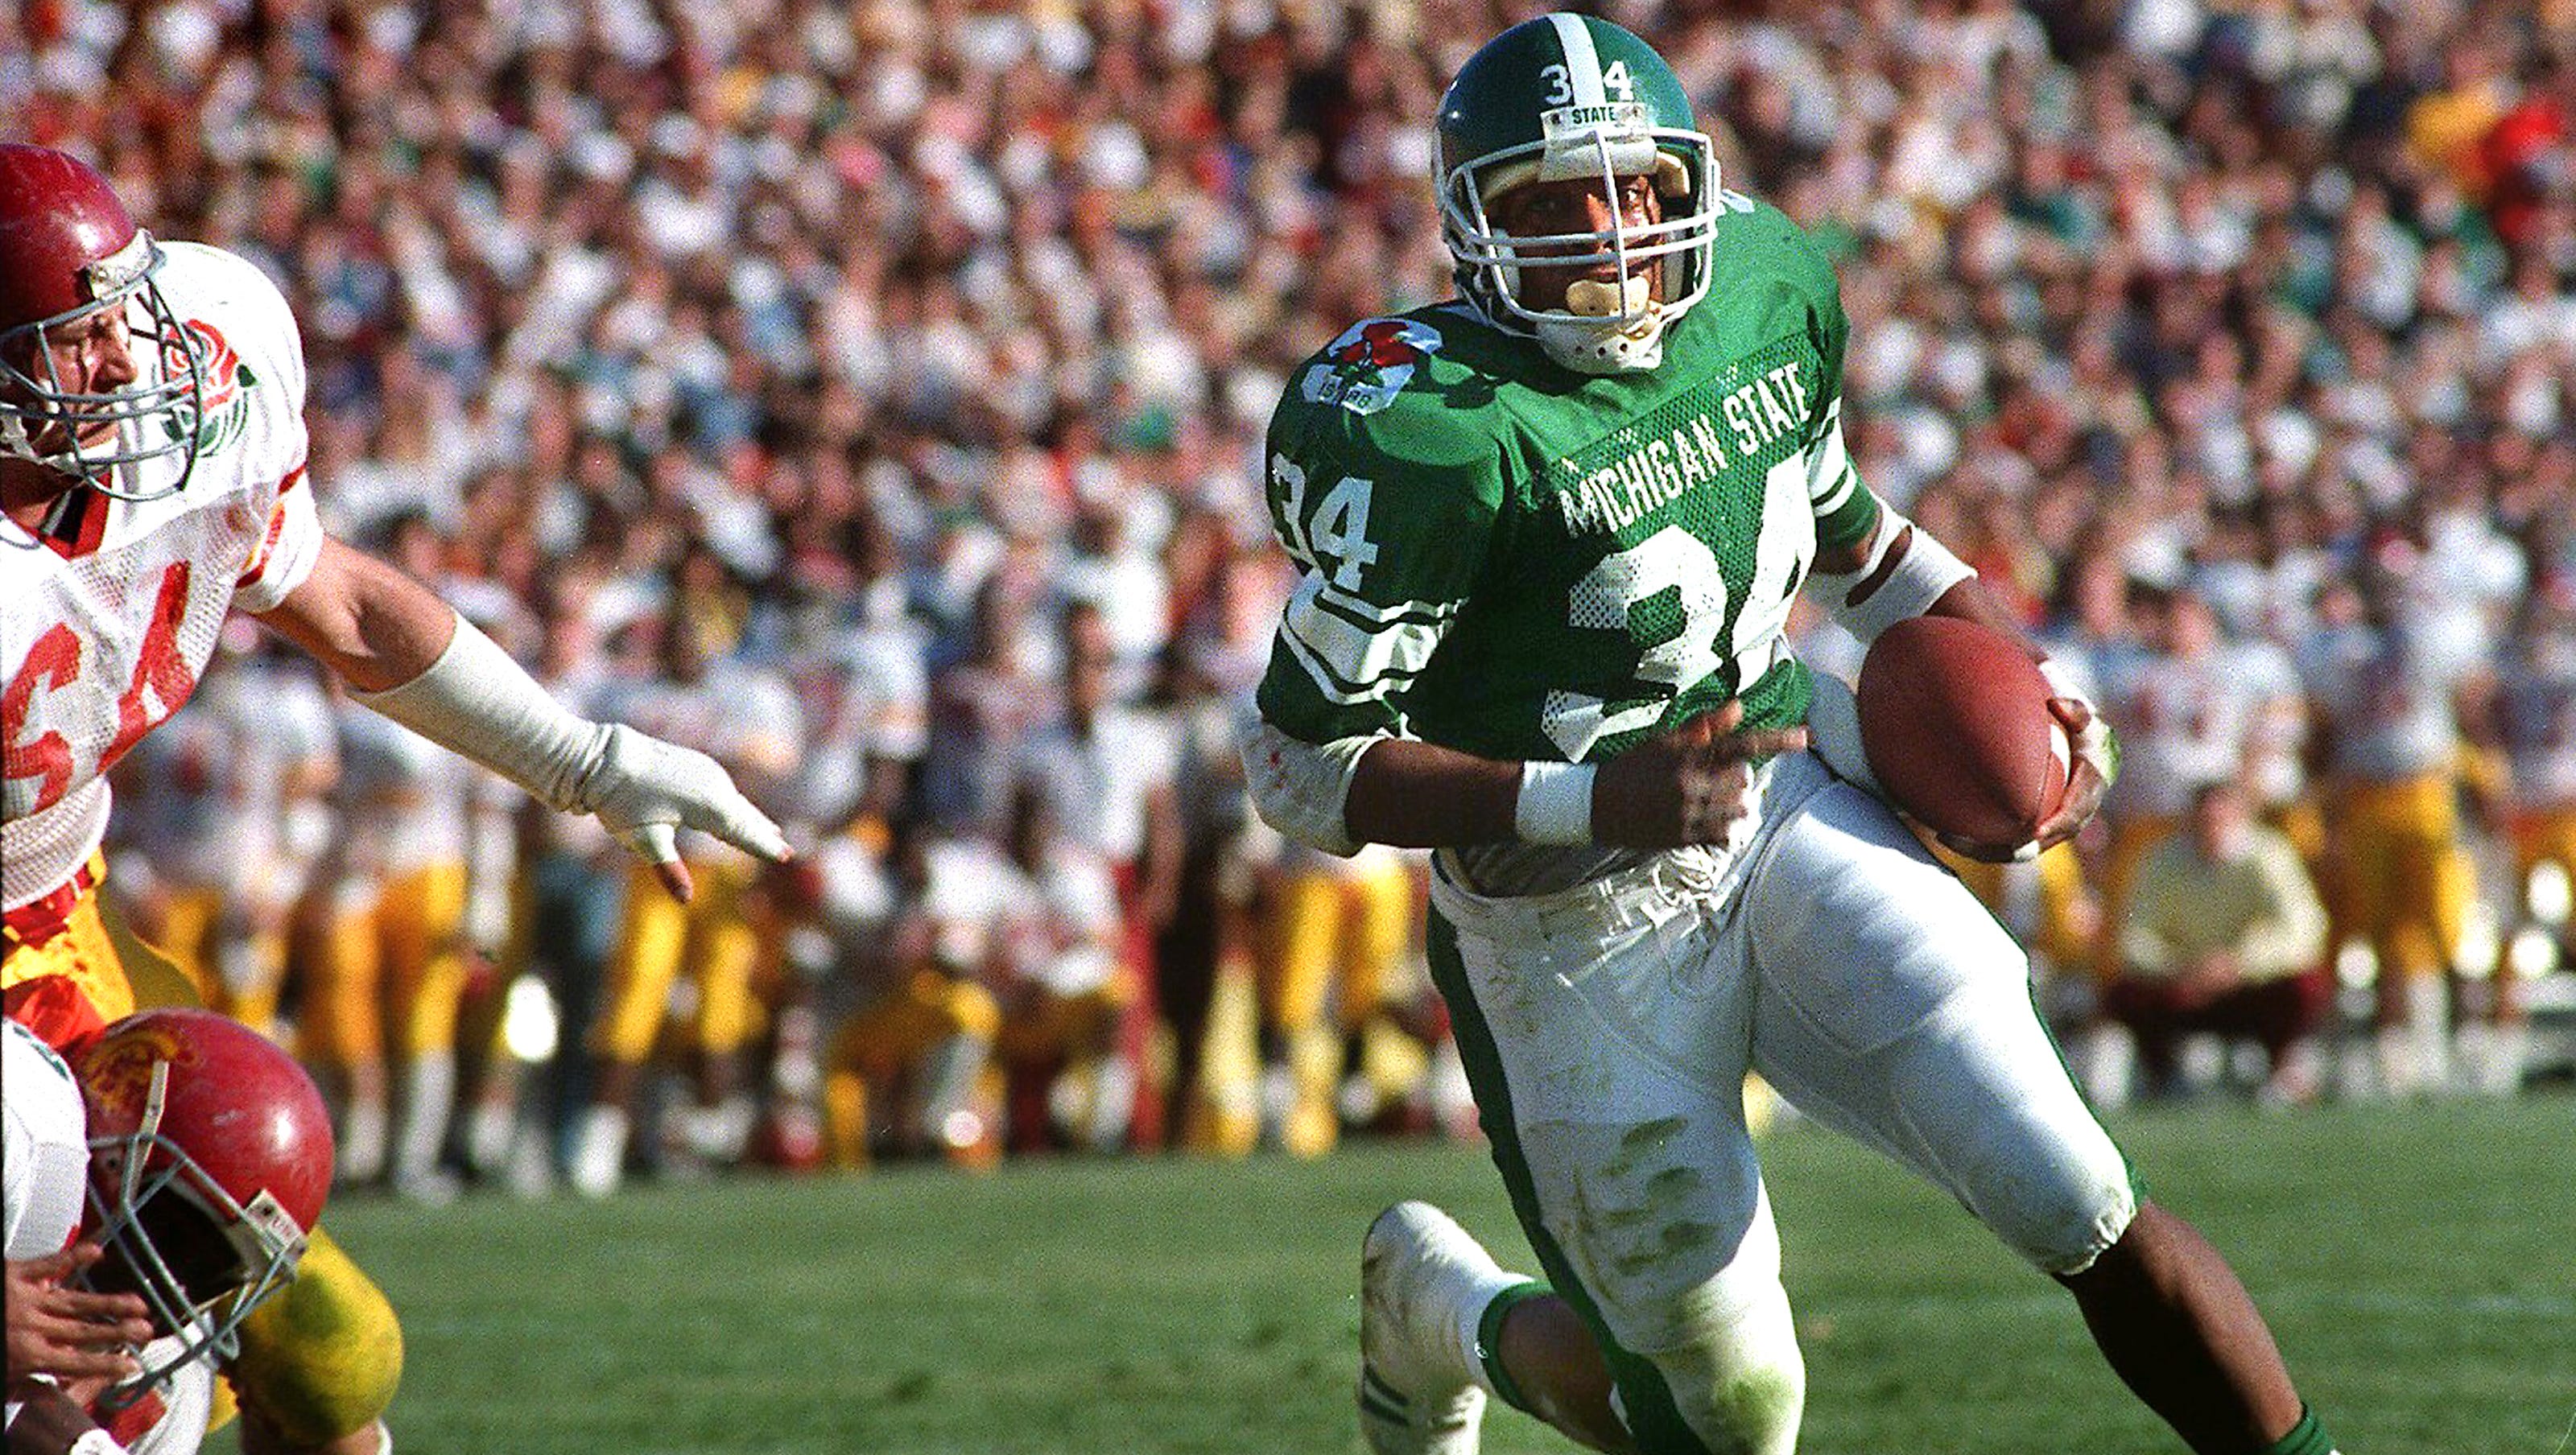 Michigan State RB Lorenzo White's path to the Hall of Fame